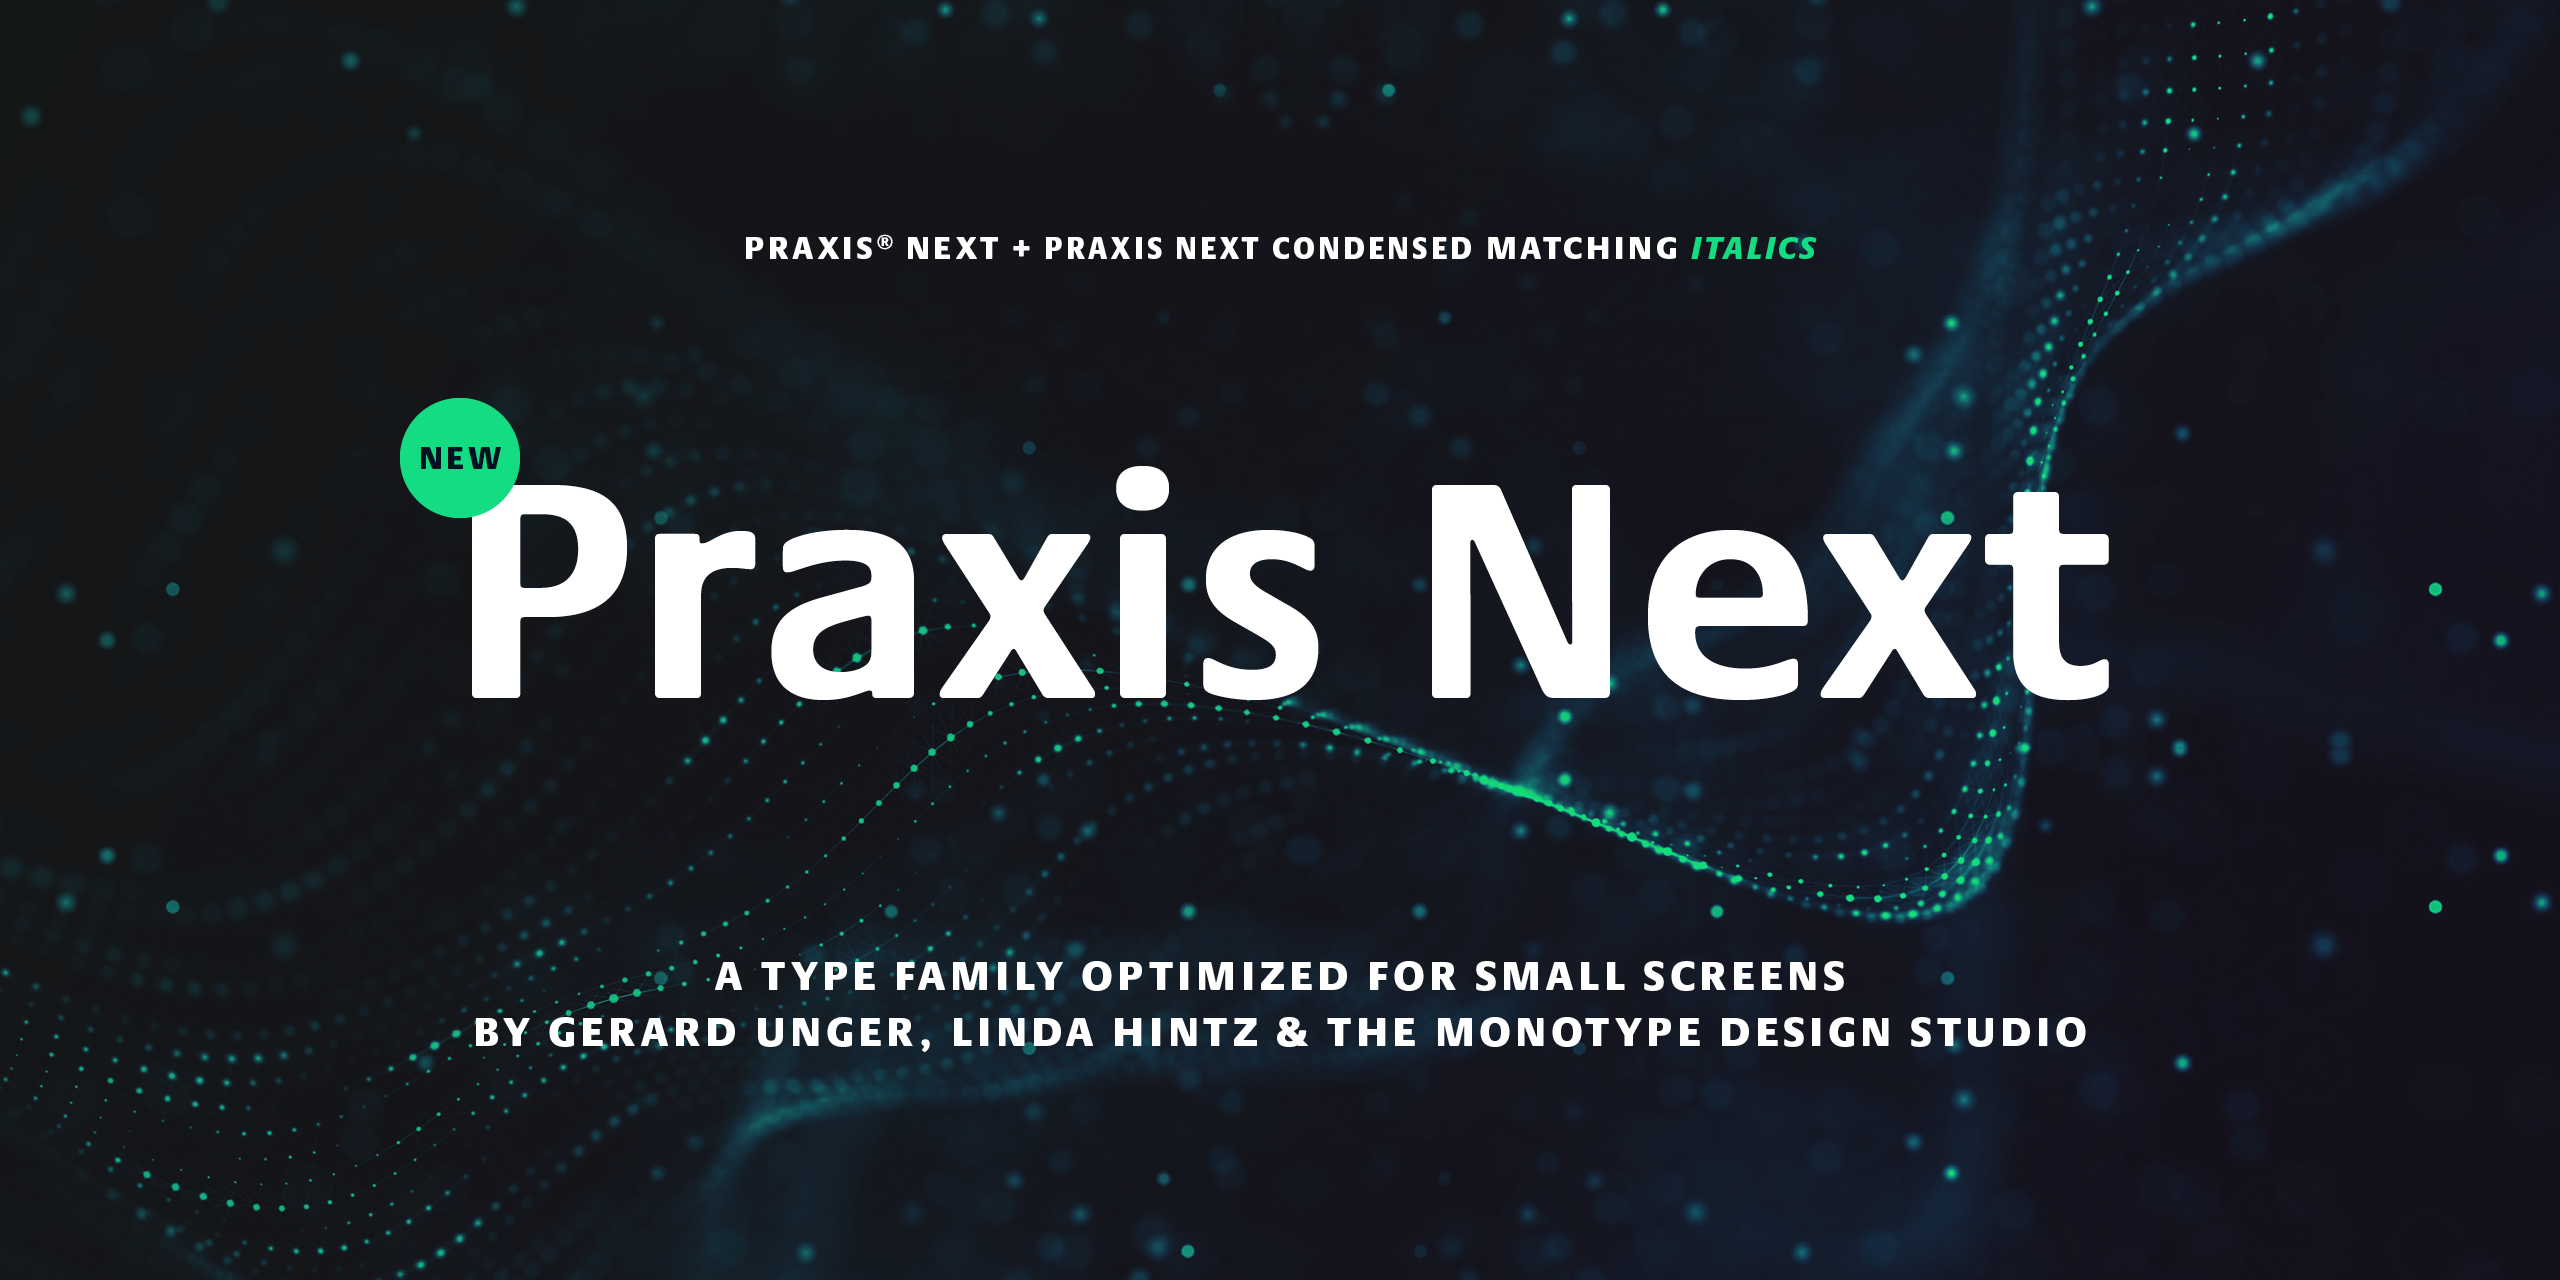 Showing for Praxis Next